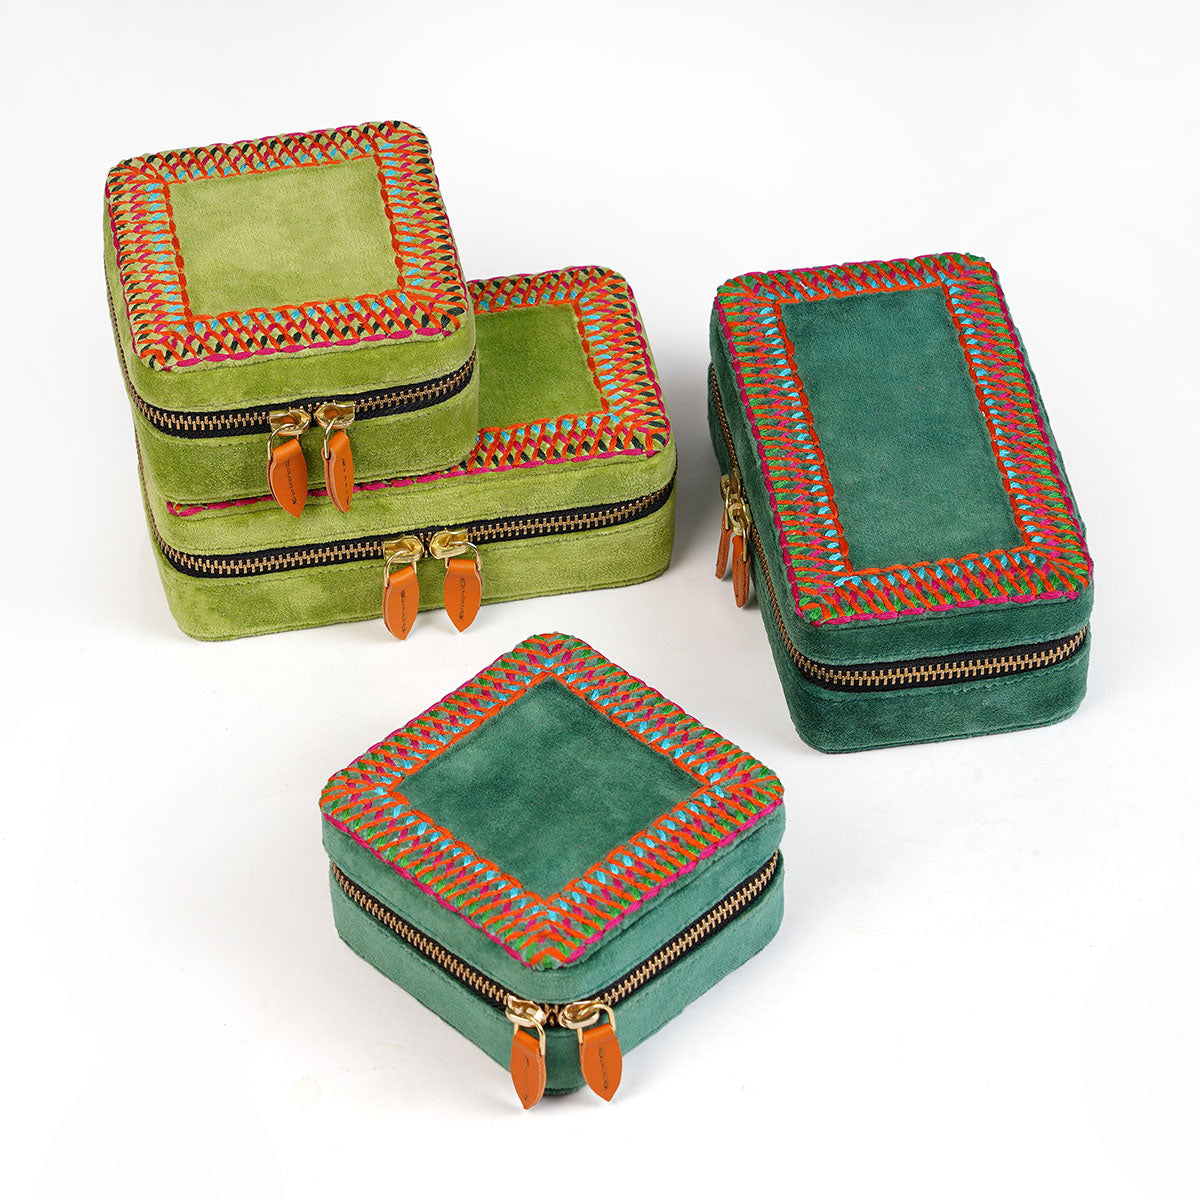 Lime green Velvet Square Embroidered Jewellery box